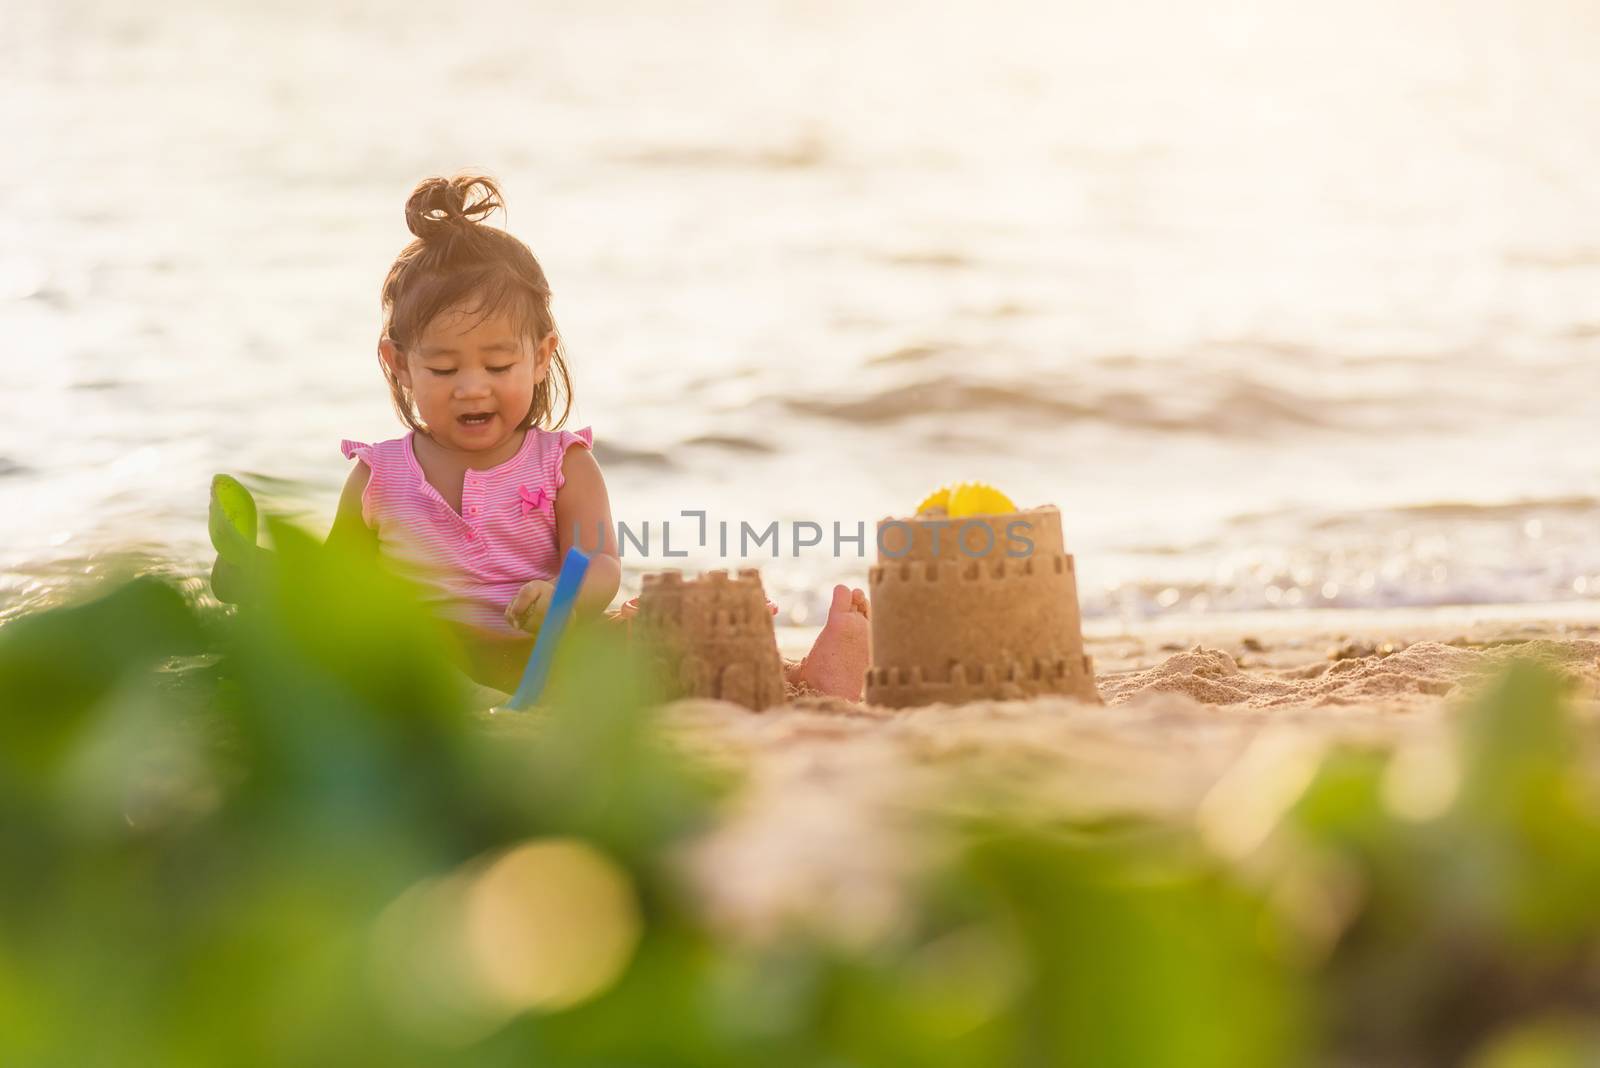 Happy fun Asian child cute little girl playing sand with toy sand tools at a tropical sea beach in holiday summer on sunset time, tourist trip concept